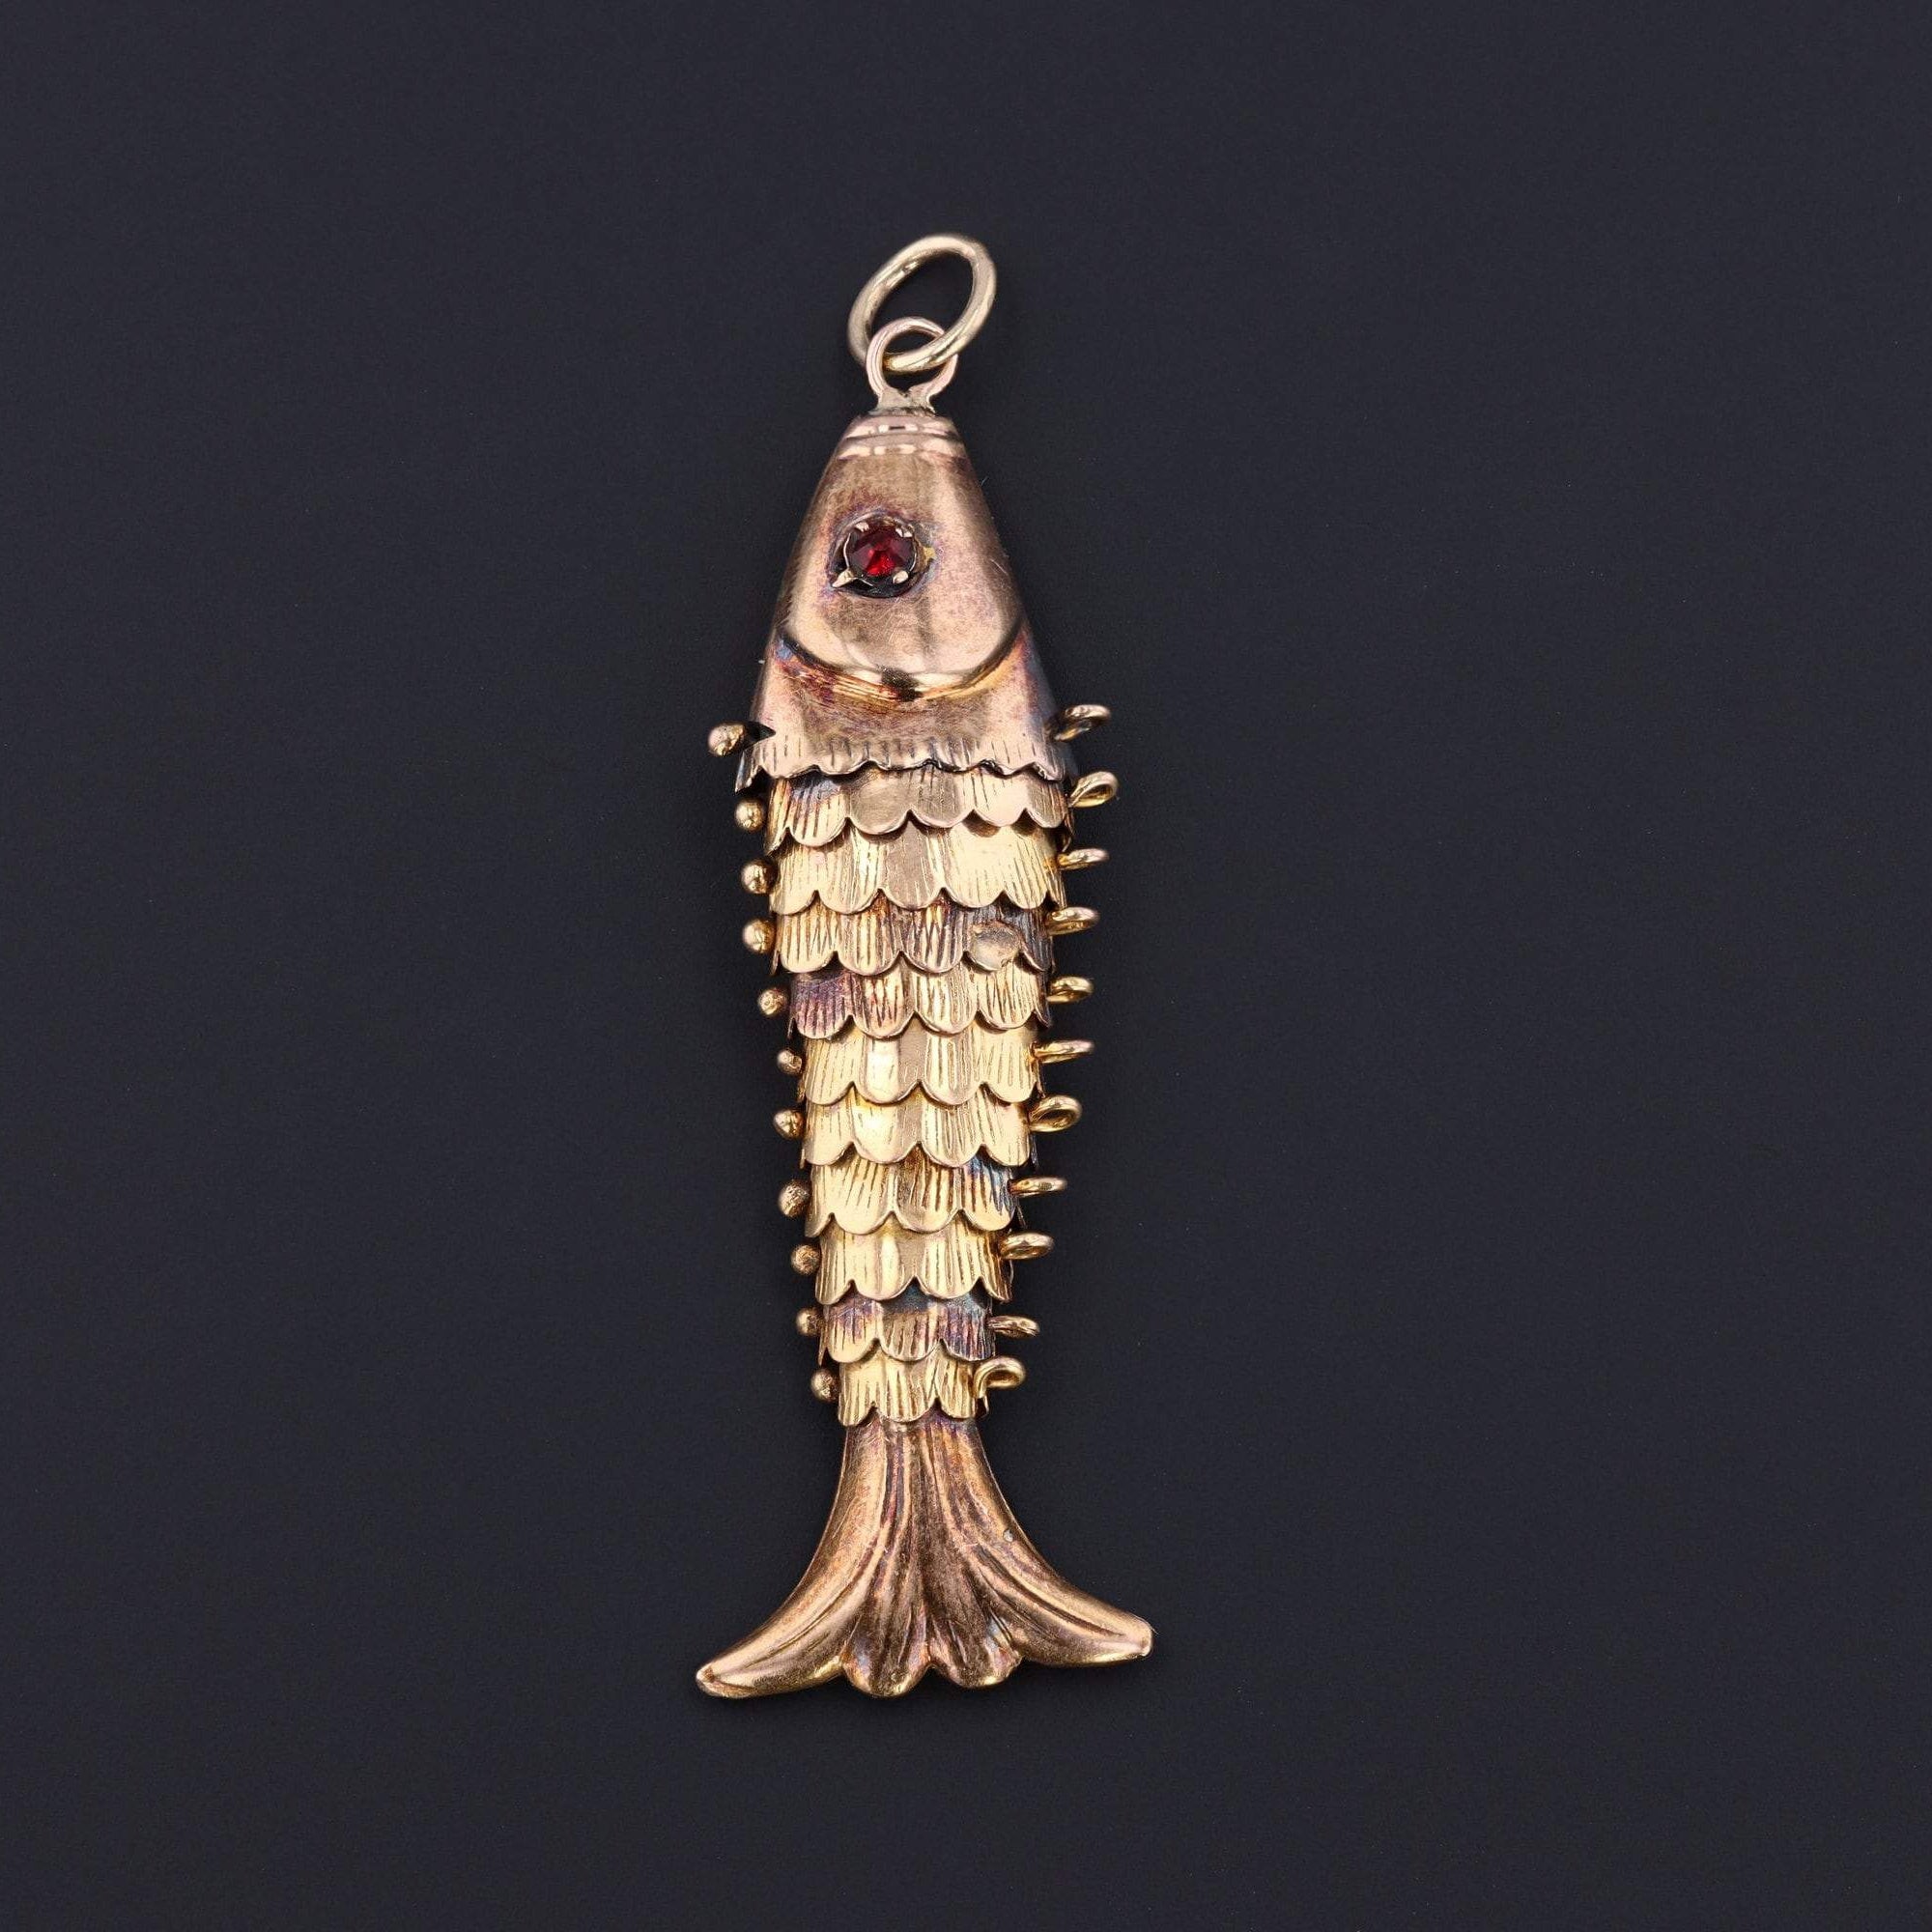 Moveable Fish Charm or Pendant | 14k Gold Fish Charm 